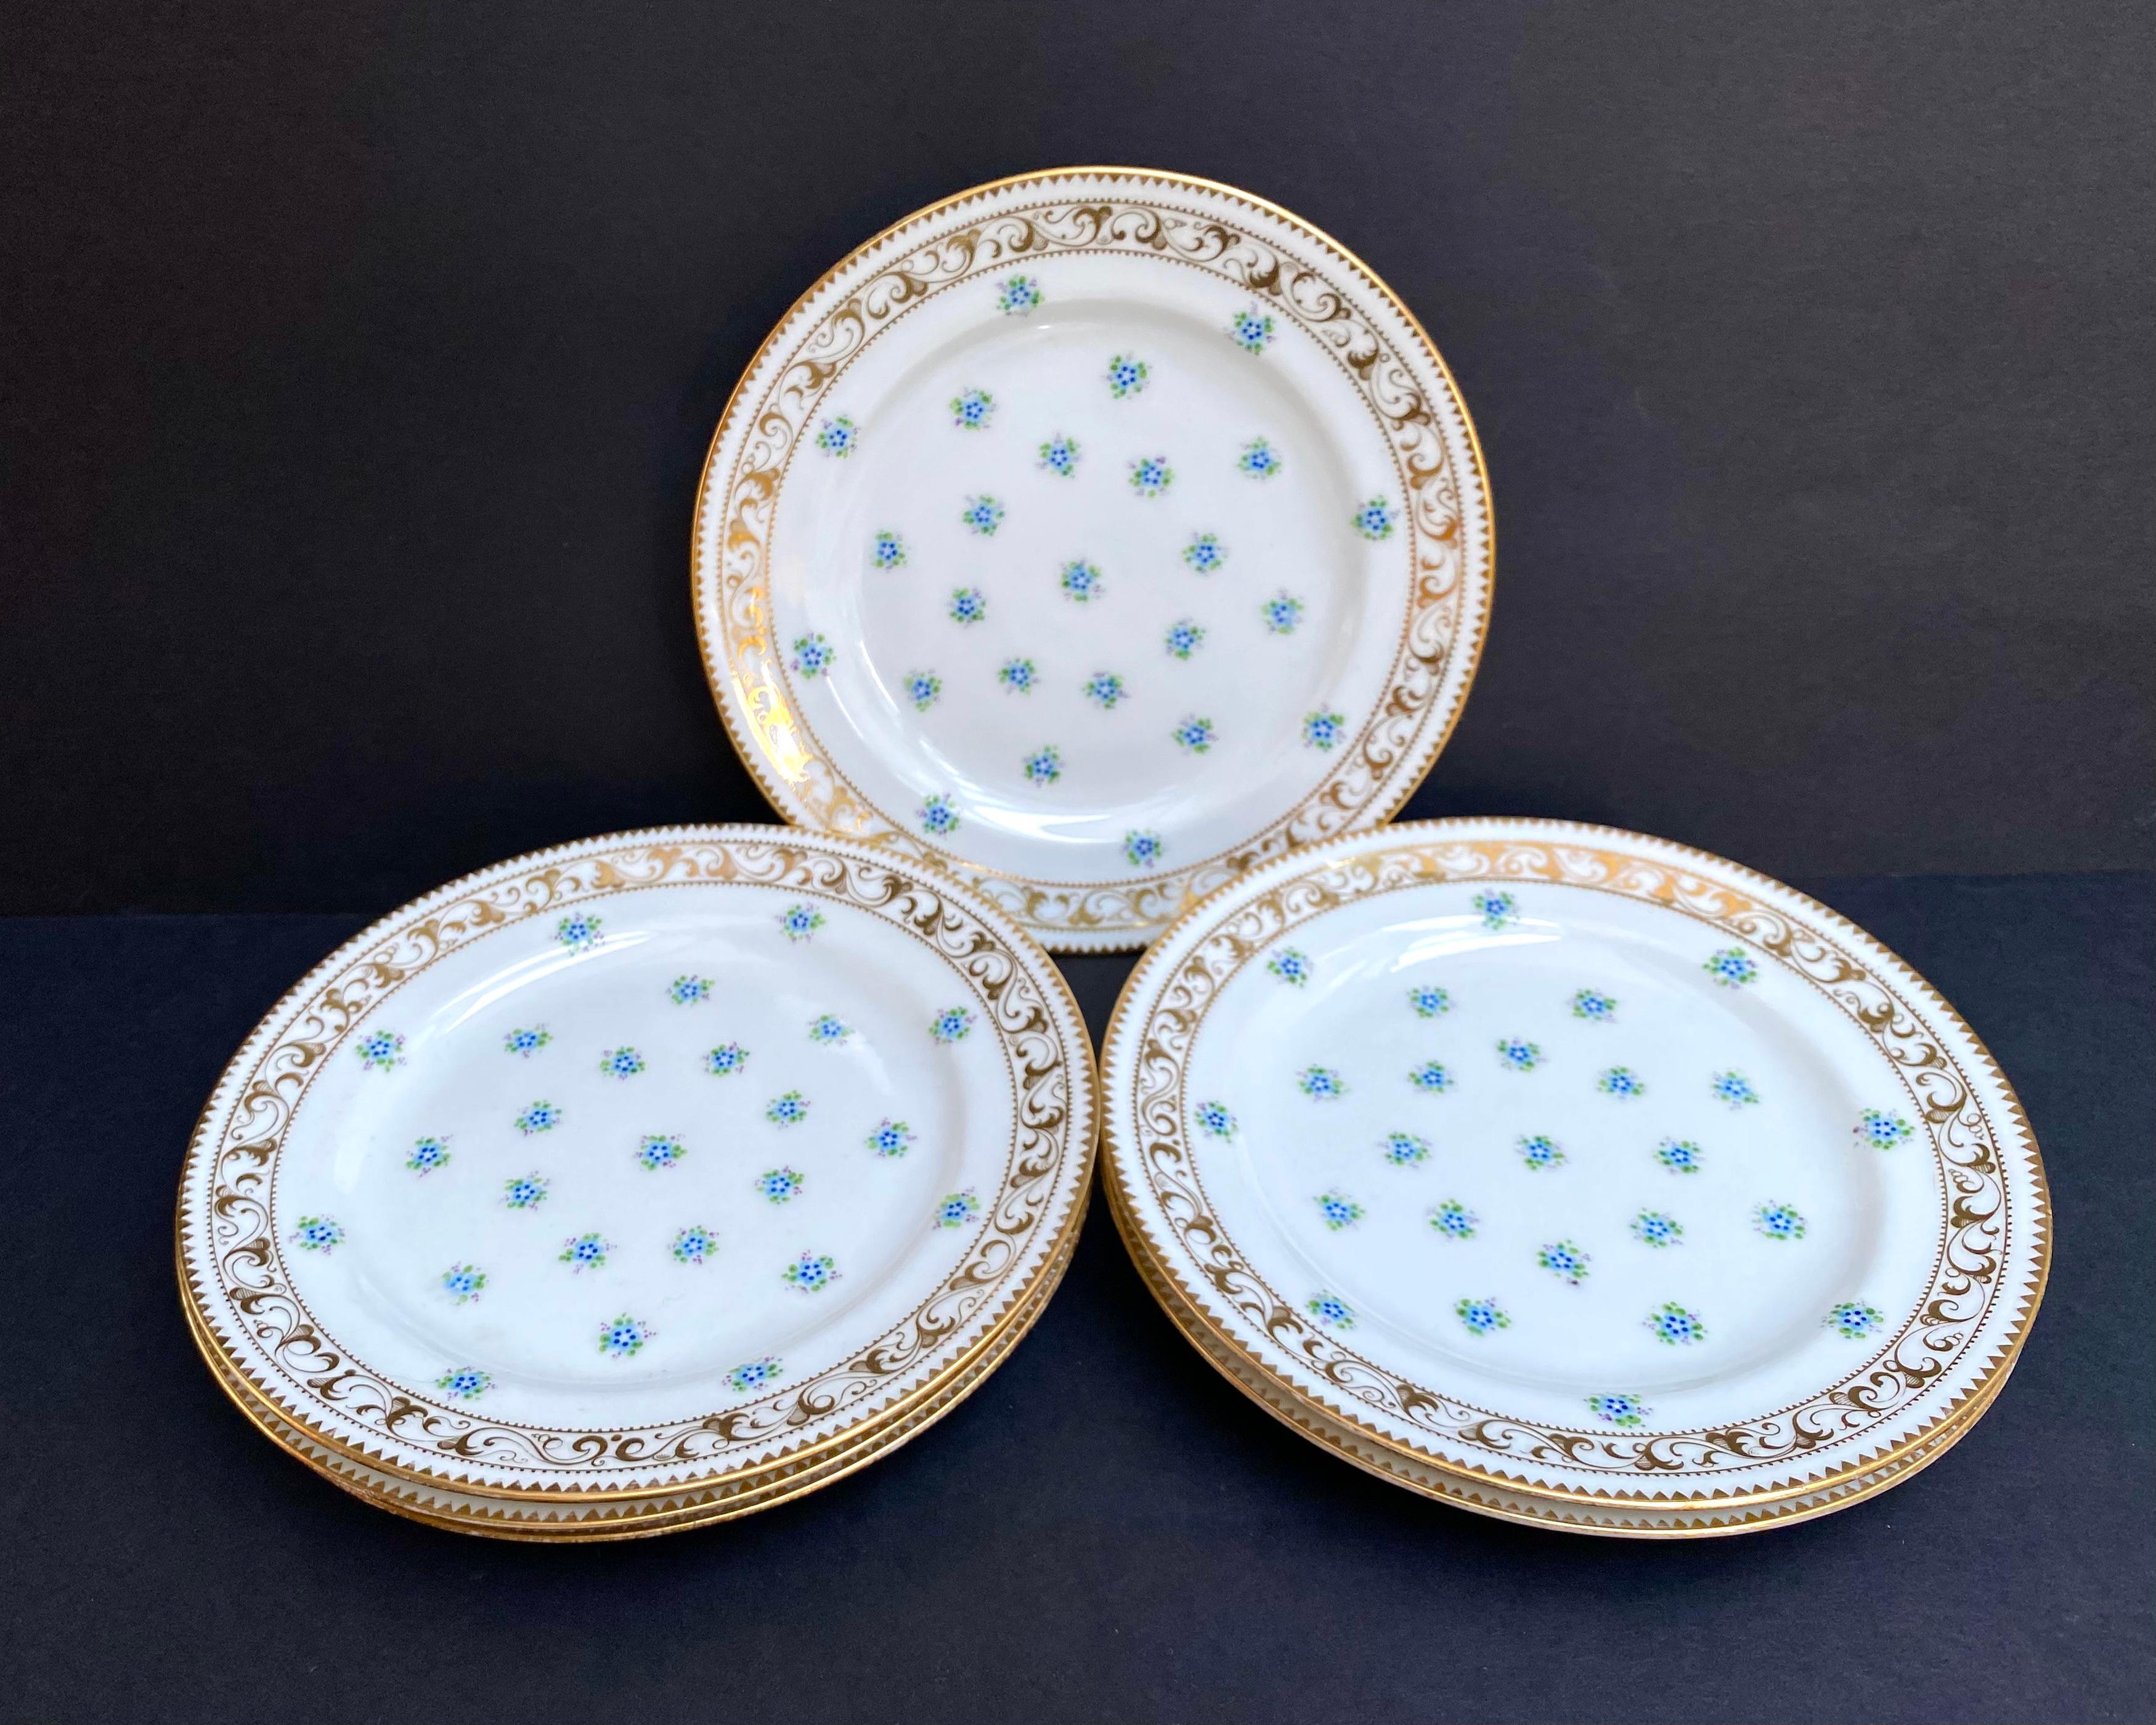 Antique Set 6 porcelain dessert plates from France for connoisseurs of unique unusual tableware.

Dinner set of plates for 6 people made of high-strength porcelain, which is characterized by a bright white color with a floral decoration and gold